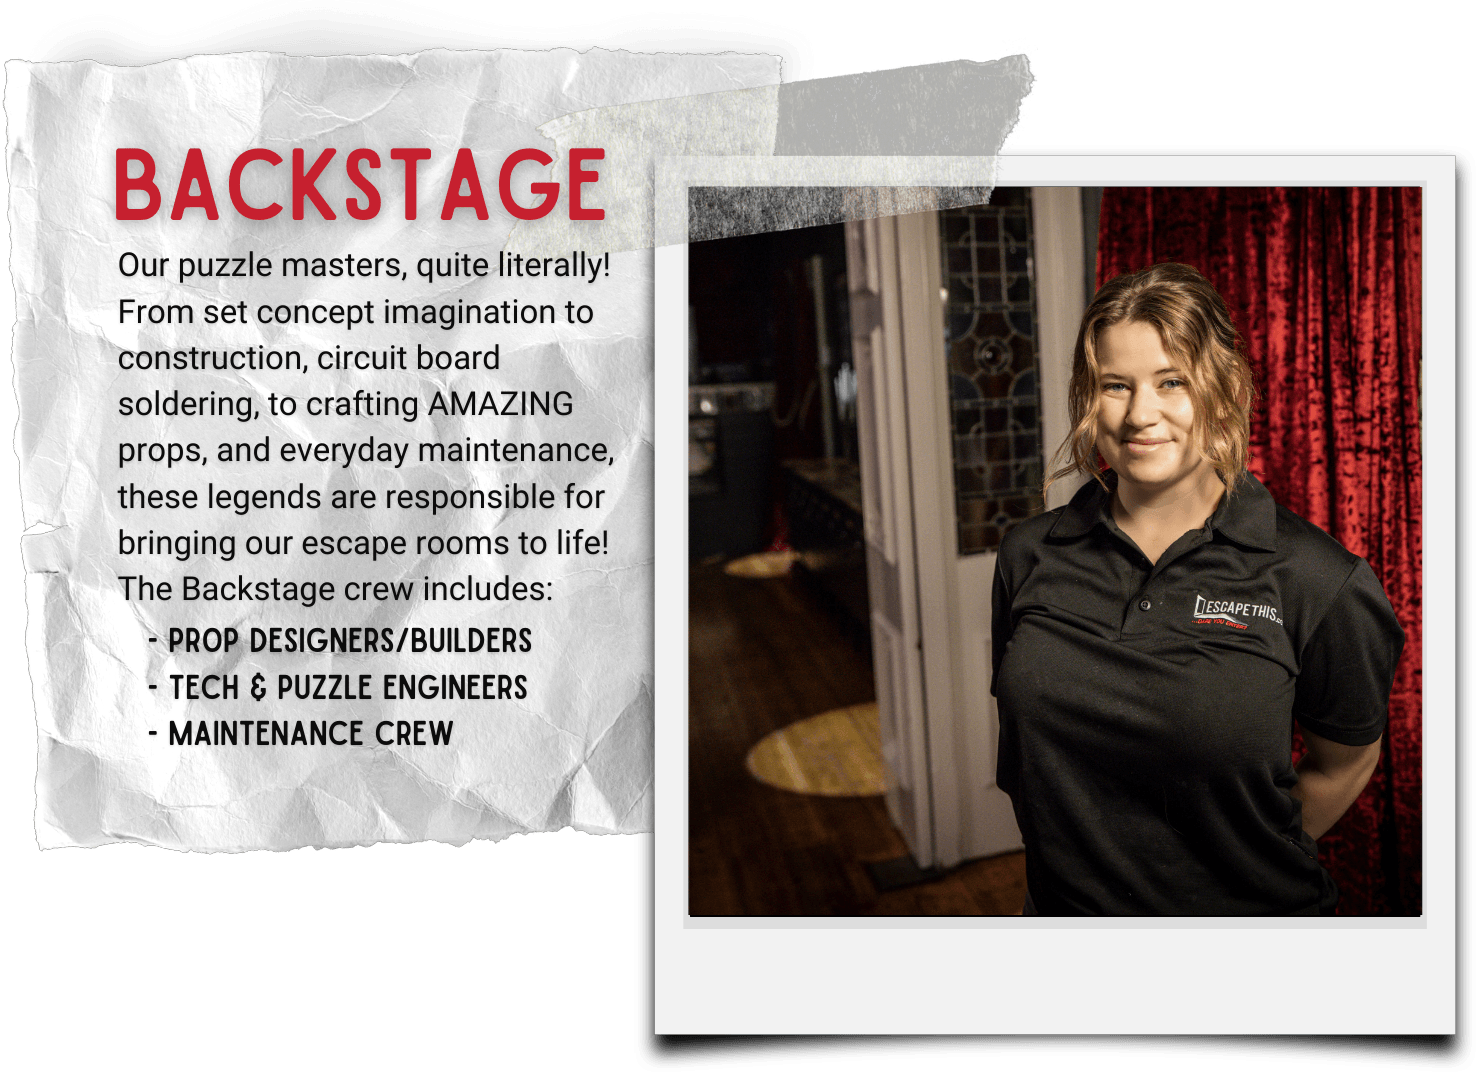 Escape This careers: escape rooms backstage team